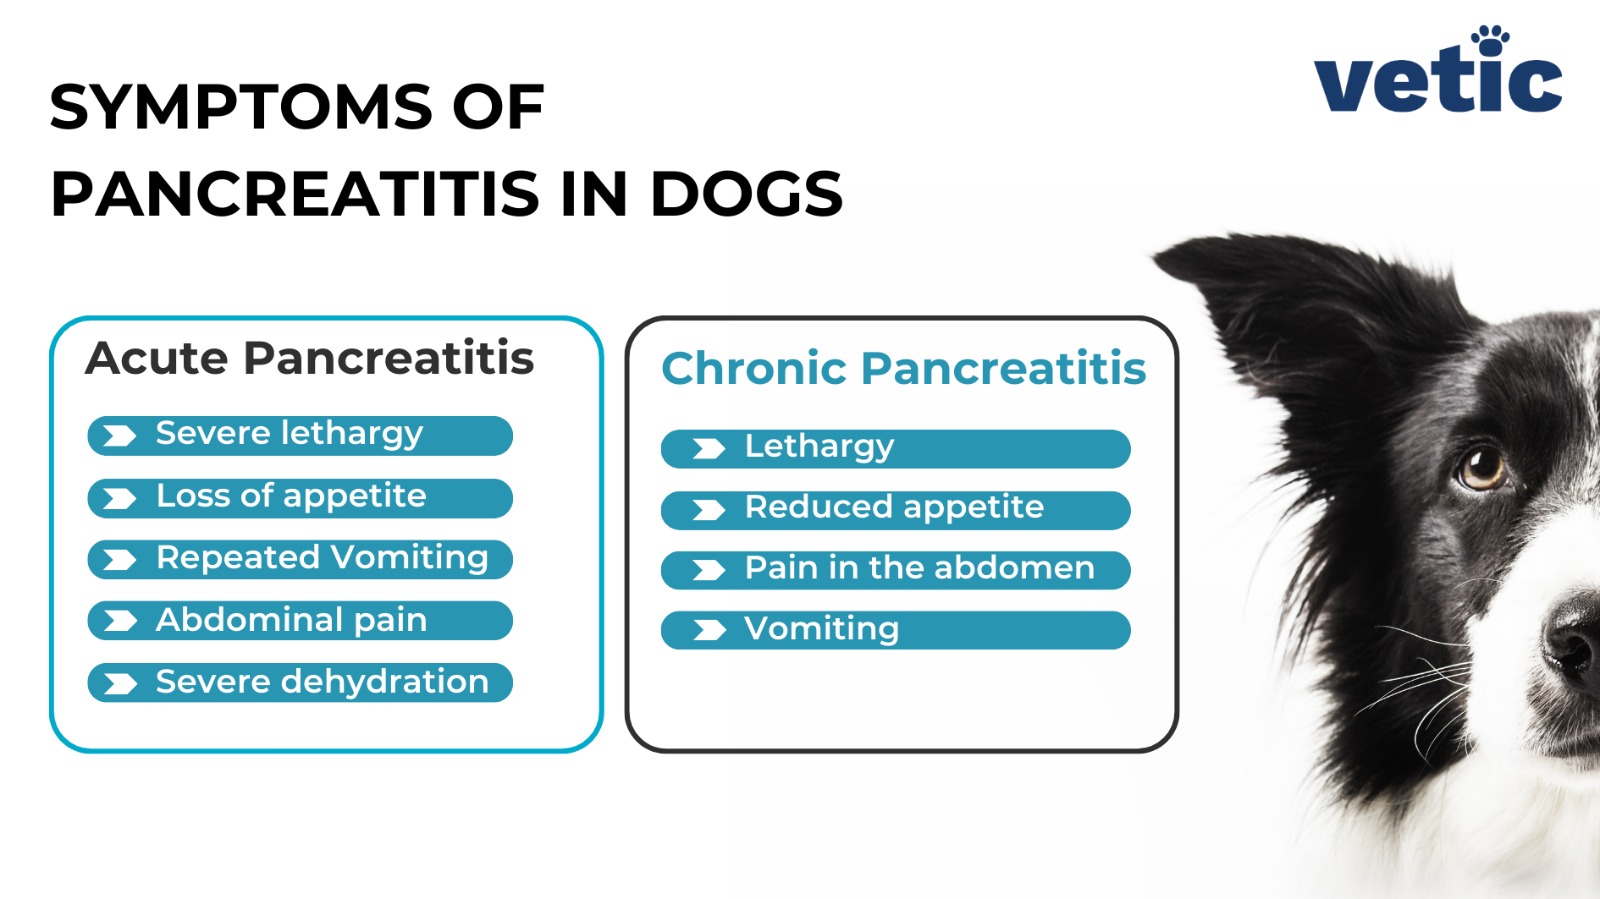 infographic on the signs and symptoms of pancreatitis in dogs. the signs of acute pancreatitis include - severe lethargy, loss of appetite, repeated vomiting, abdominal pain and dehydration. the signs of chronic pancreatitis include lethargy, reduce appetite, abdominal pain and repeated vomiting.